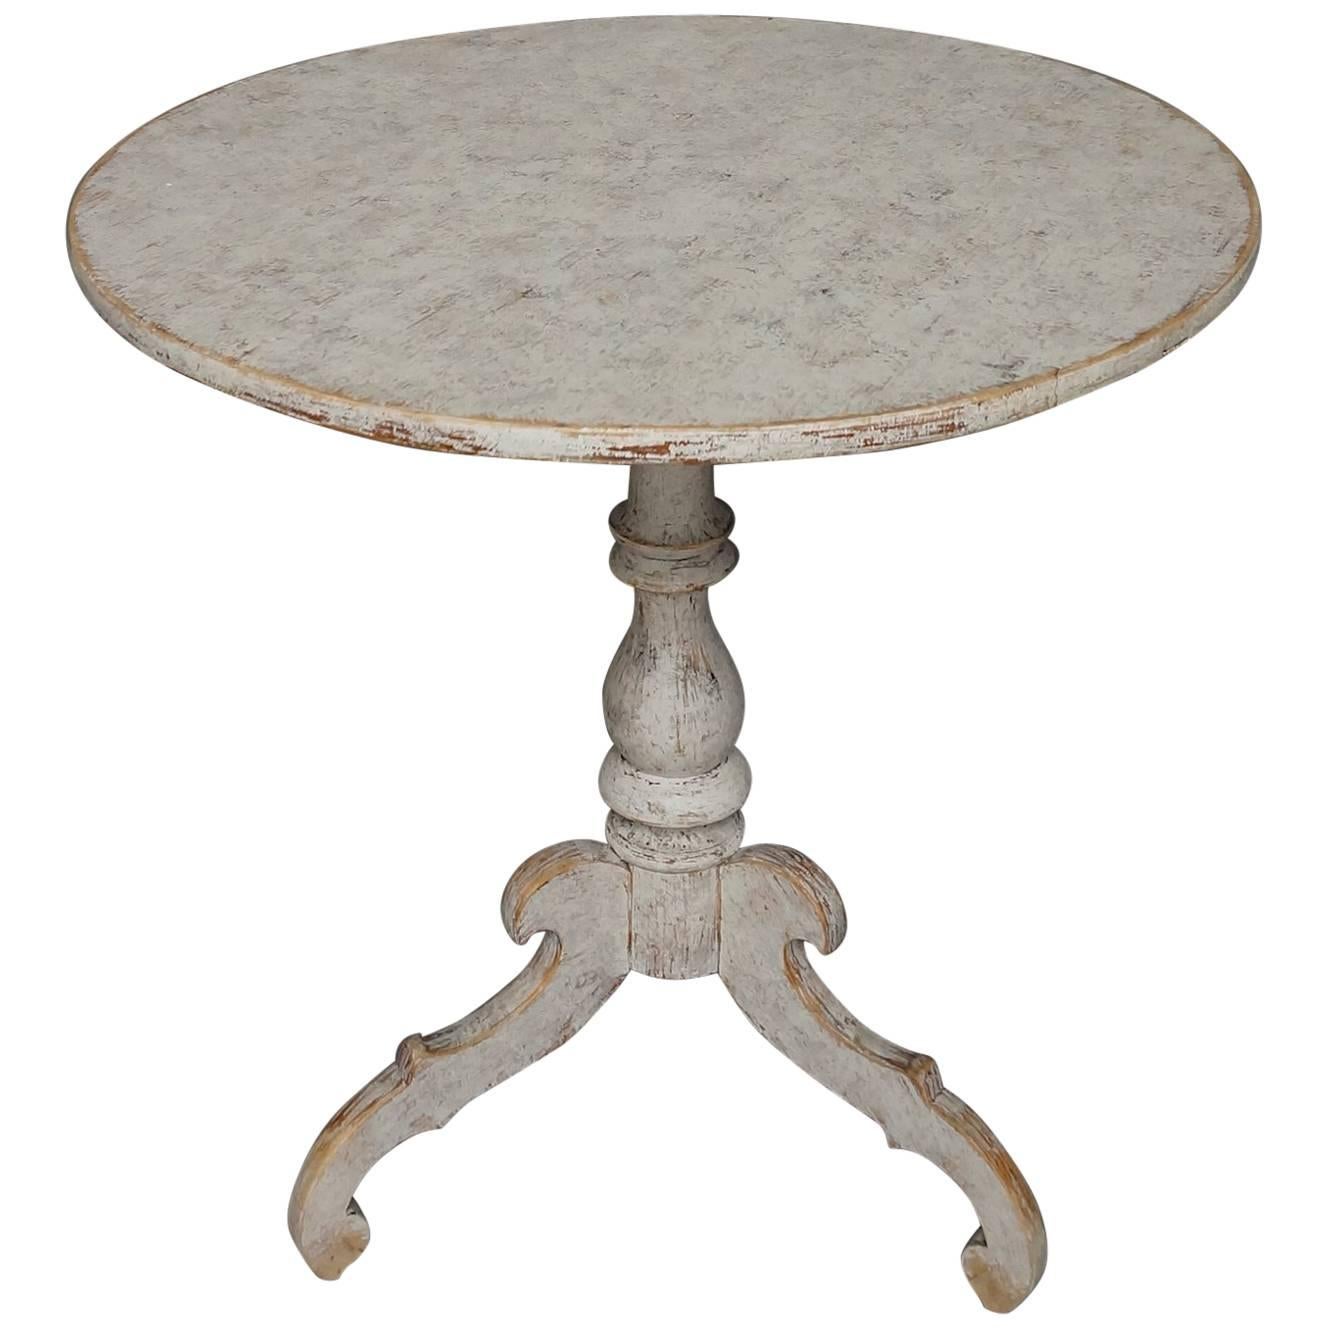 Swedish Pedestal Table in Worn White Paint